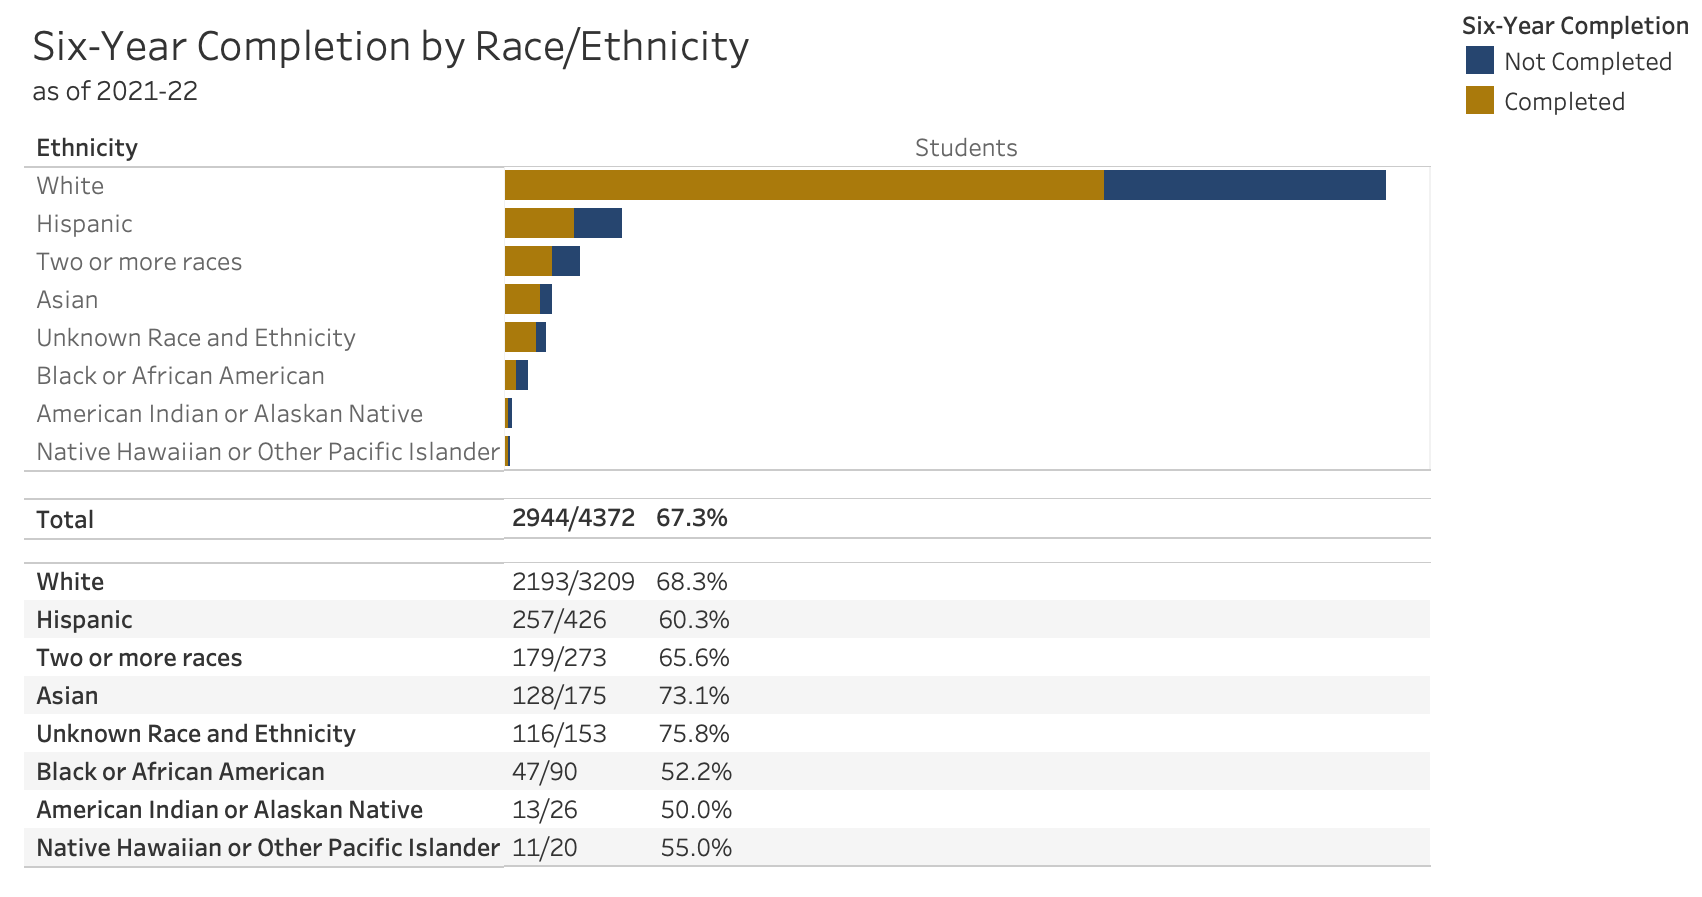 6-year completion rate by race/ethnicity